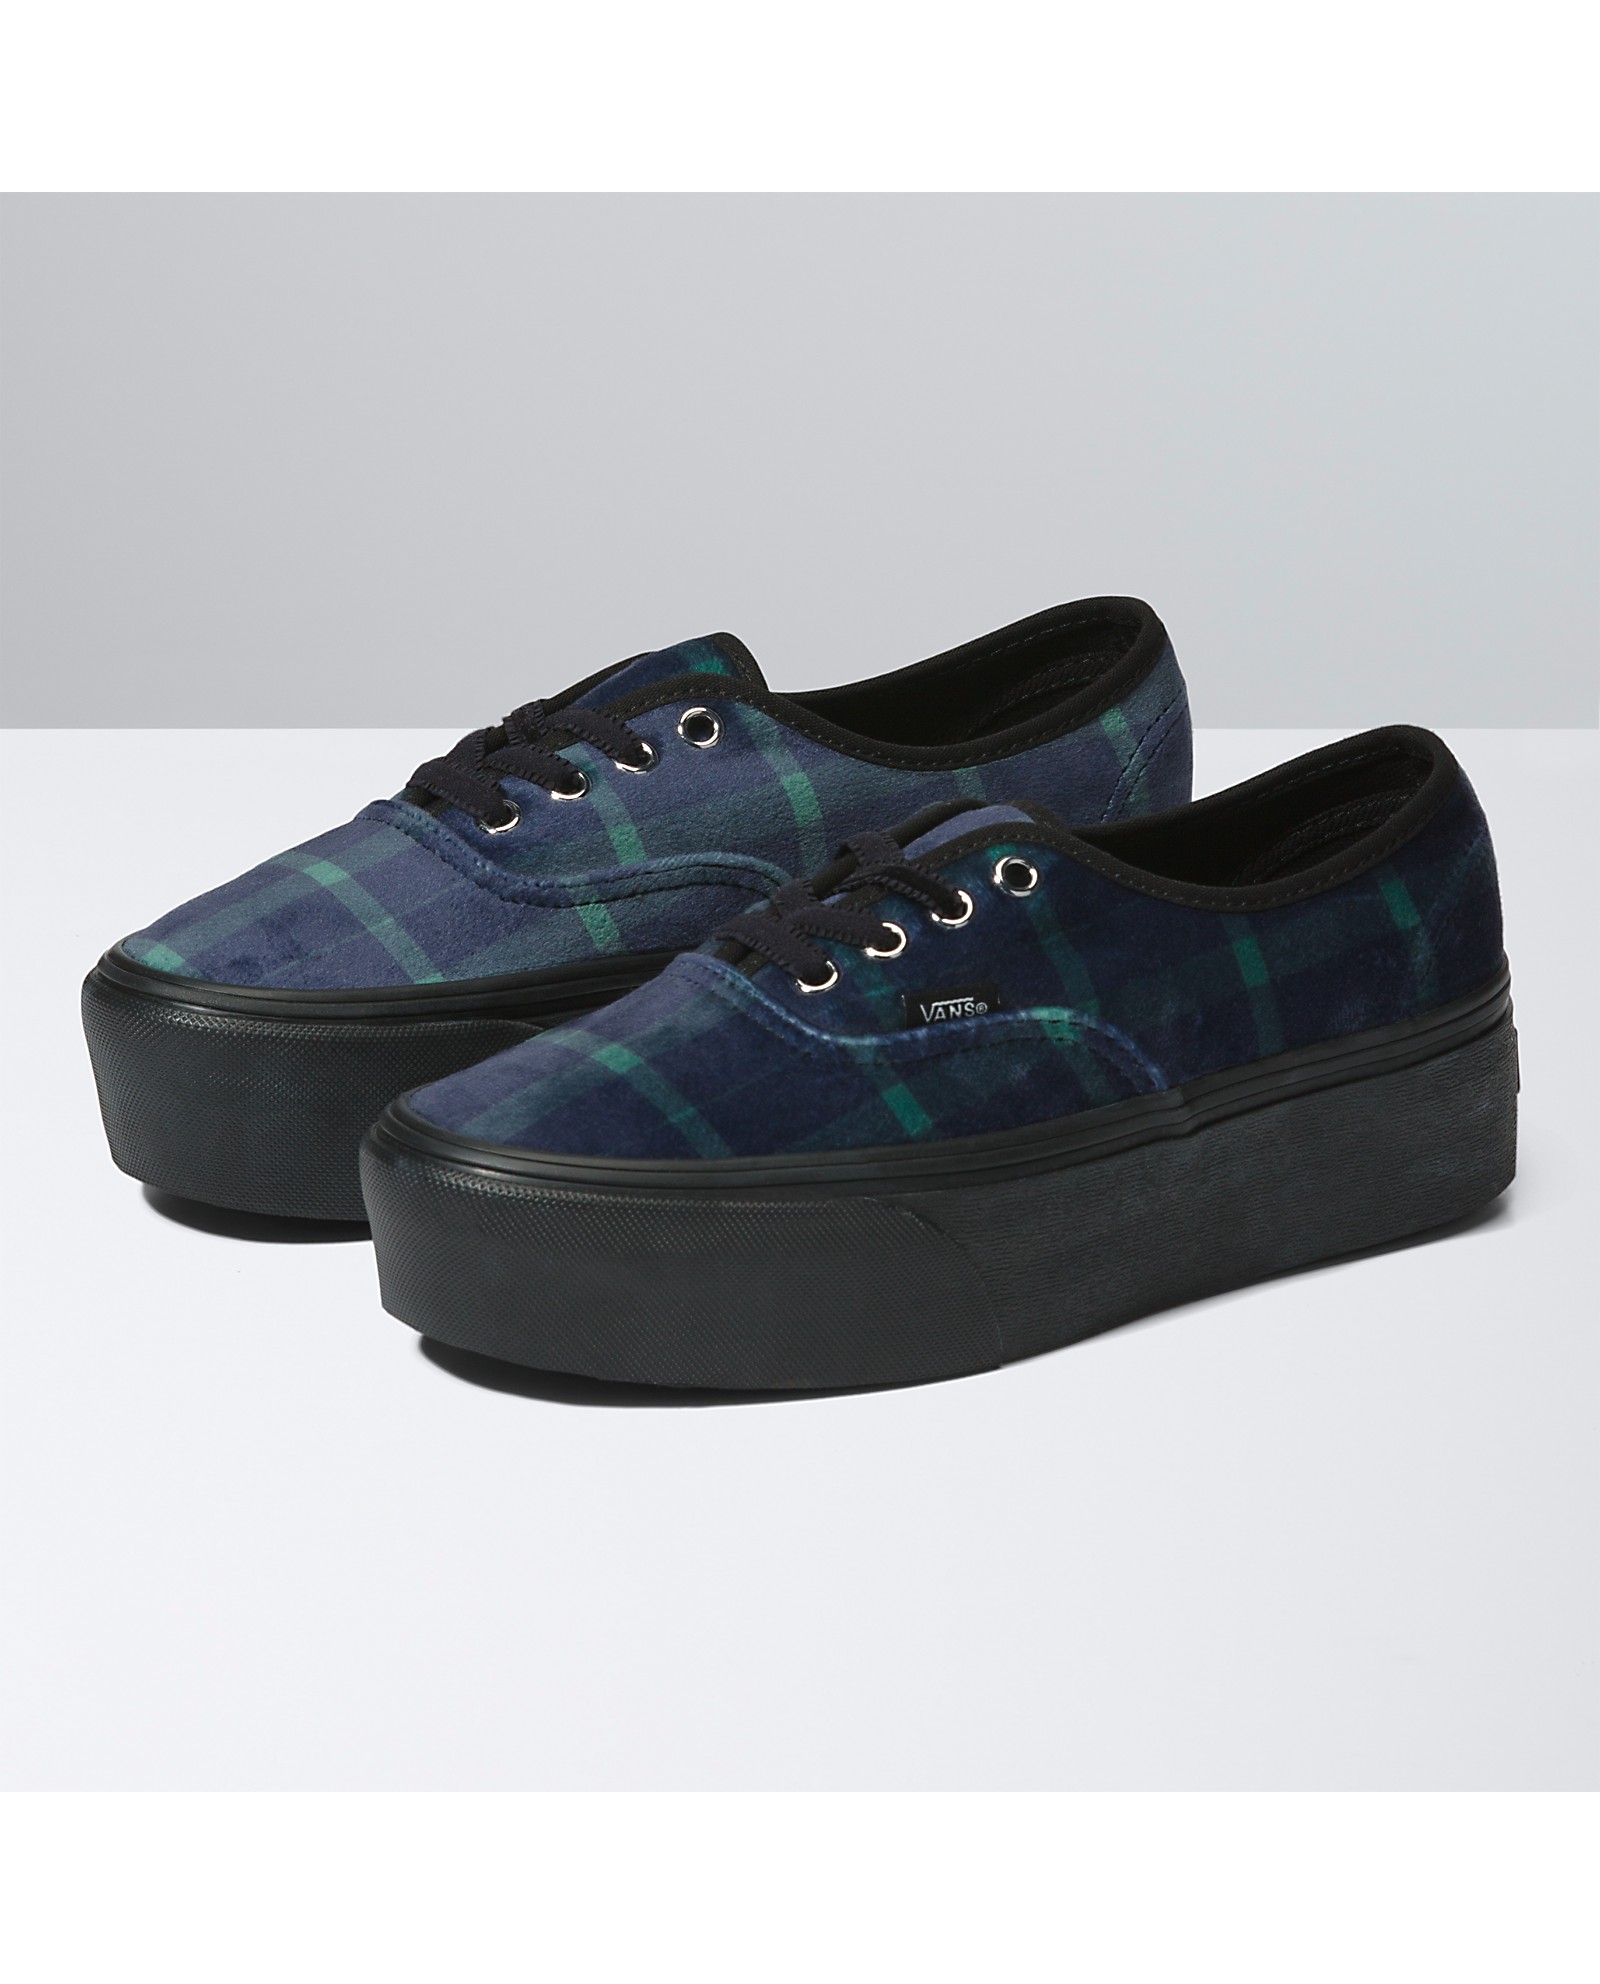 Vans Men's or Women's Authentic Stackform Shoes (Green/Black or Sandstone) $39.95 + Free Shipping